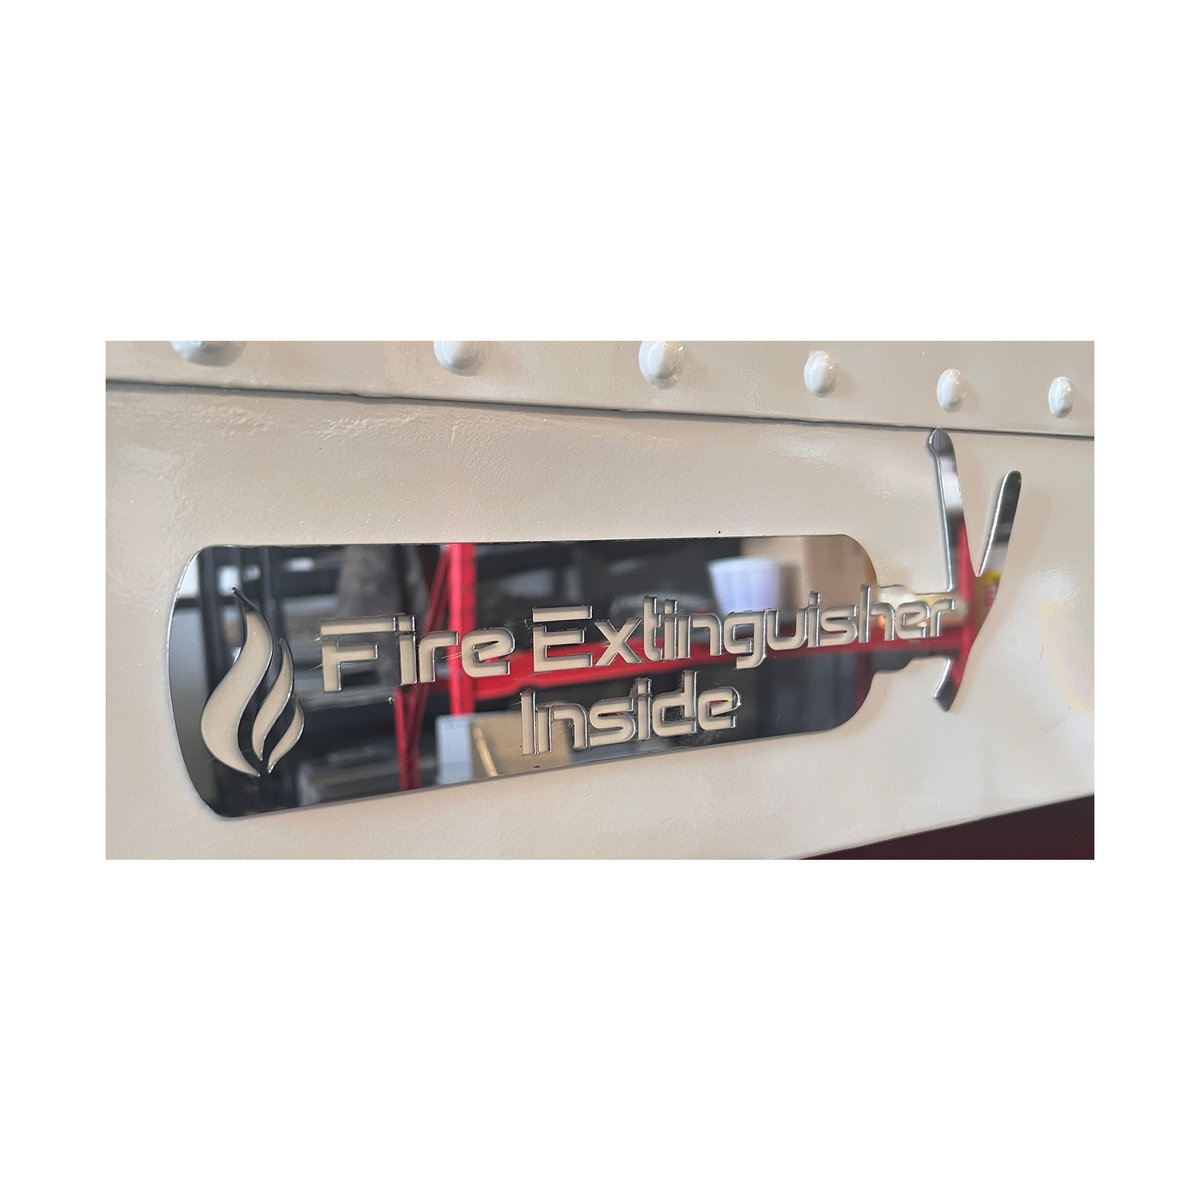 Fire Extinguisher Inside Truck Stainless Steel Decal